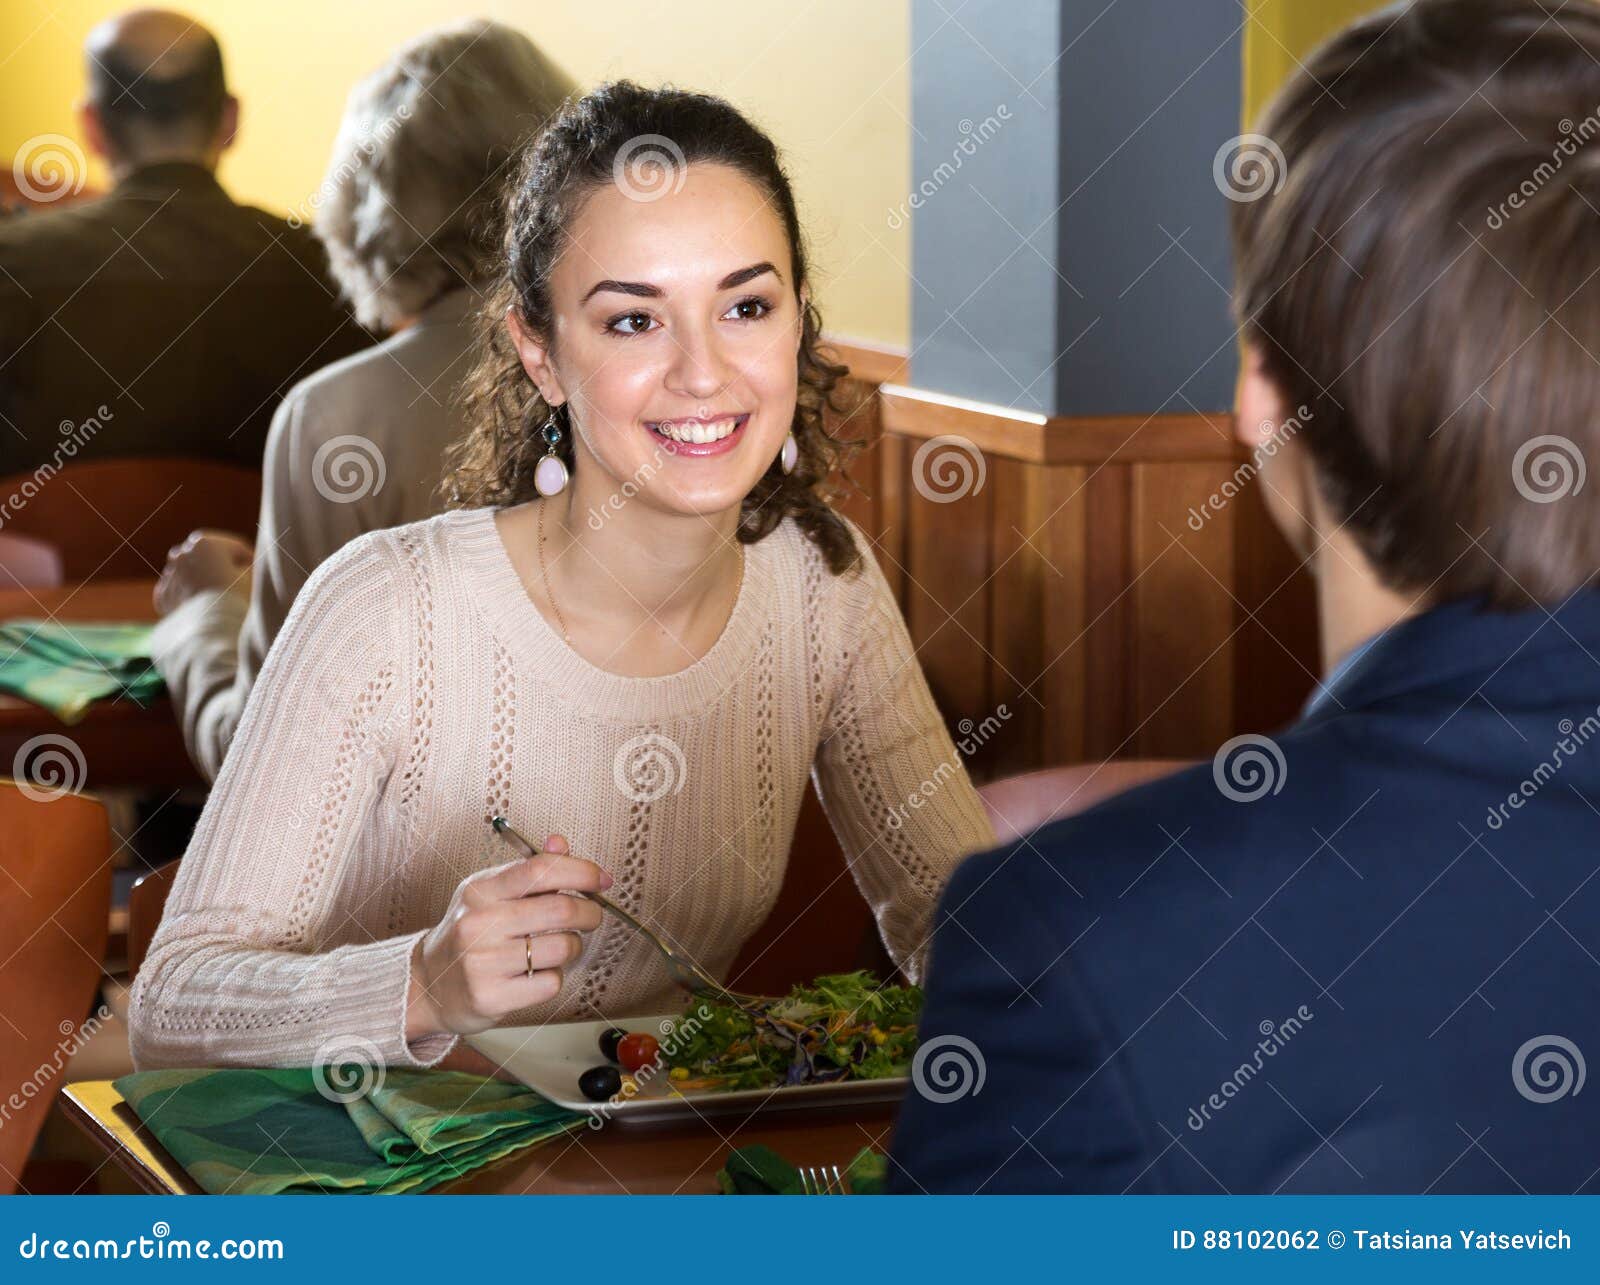 Image result for pic young man woman at dinner